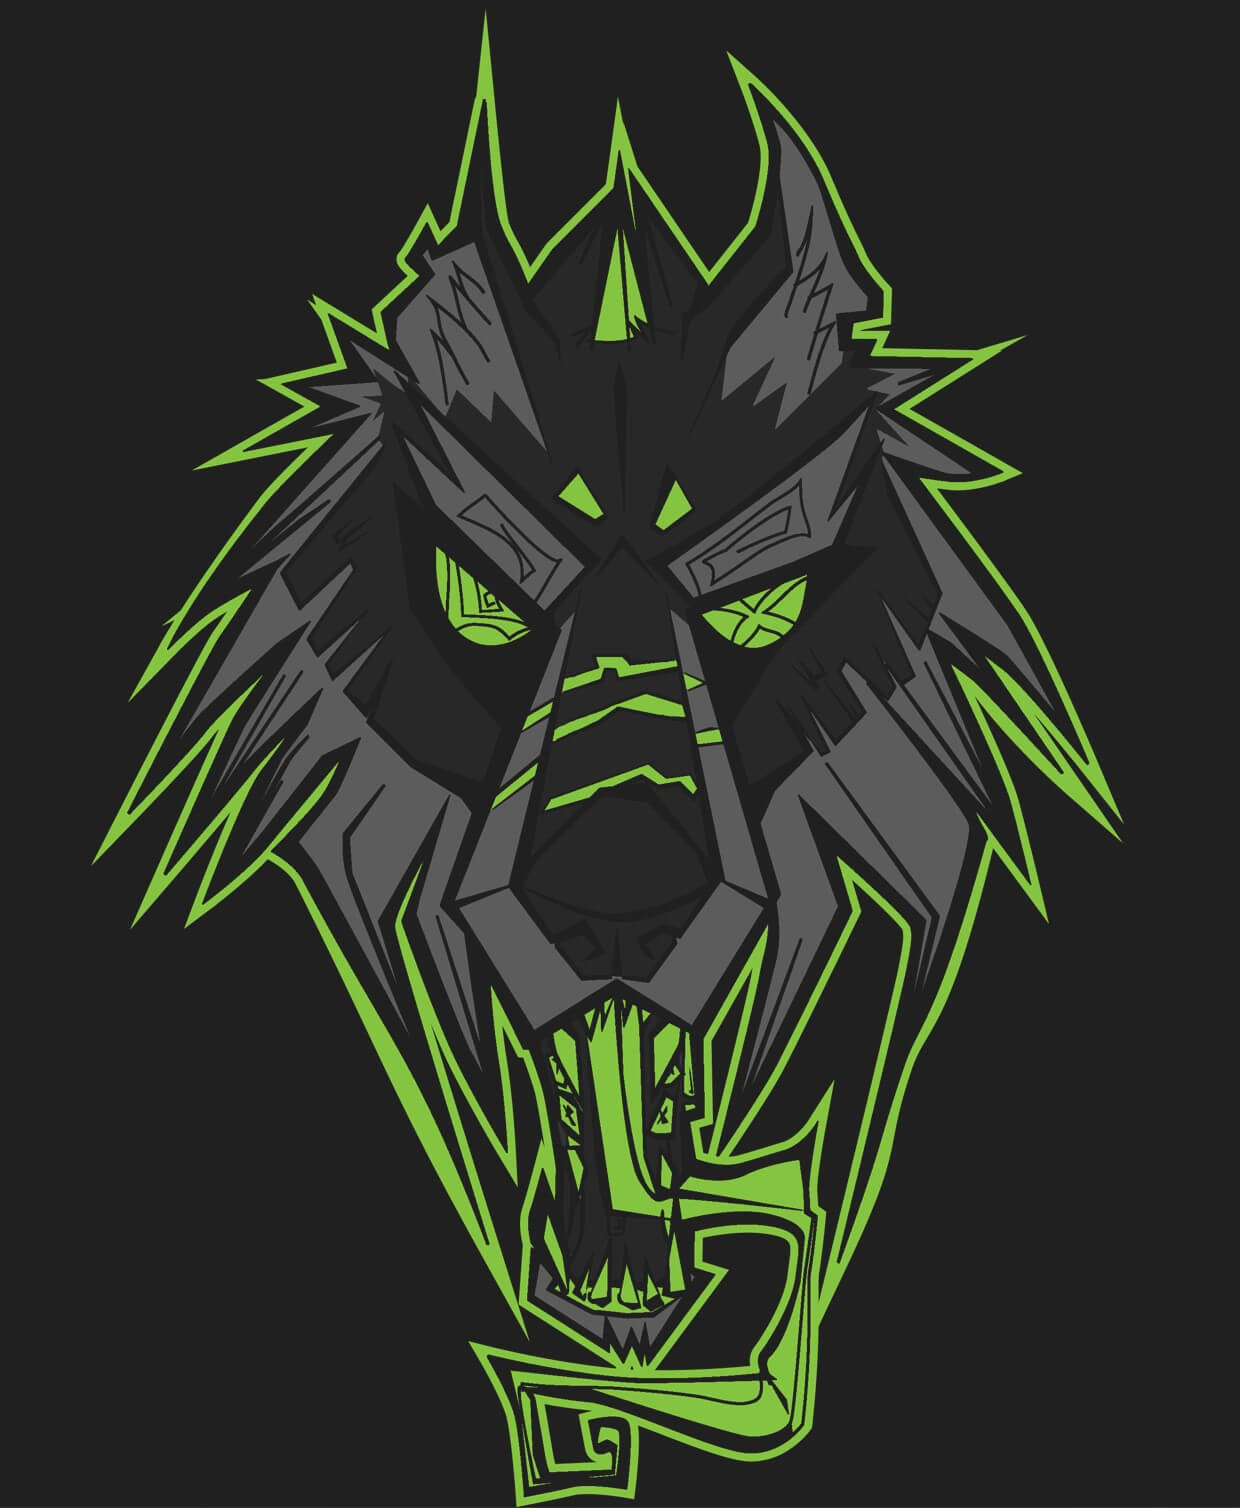 A grey and green wolf head on a grey background. The wolf has odd eyes and a long, twisting tongue.